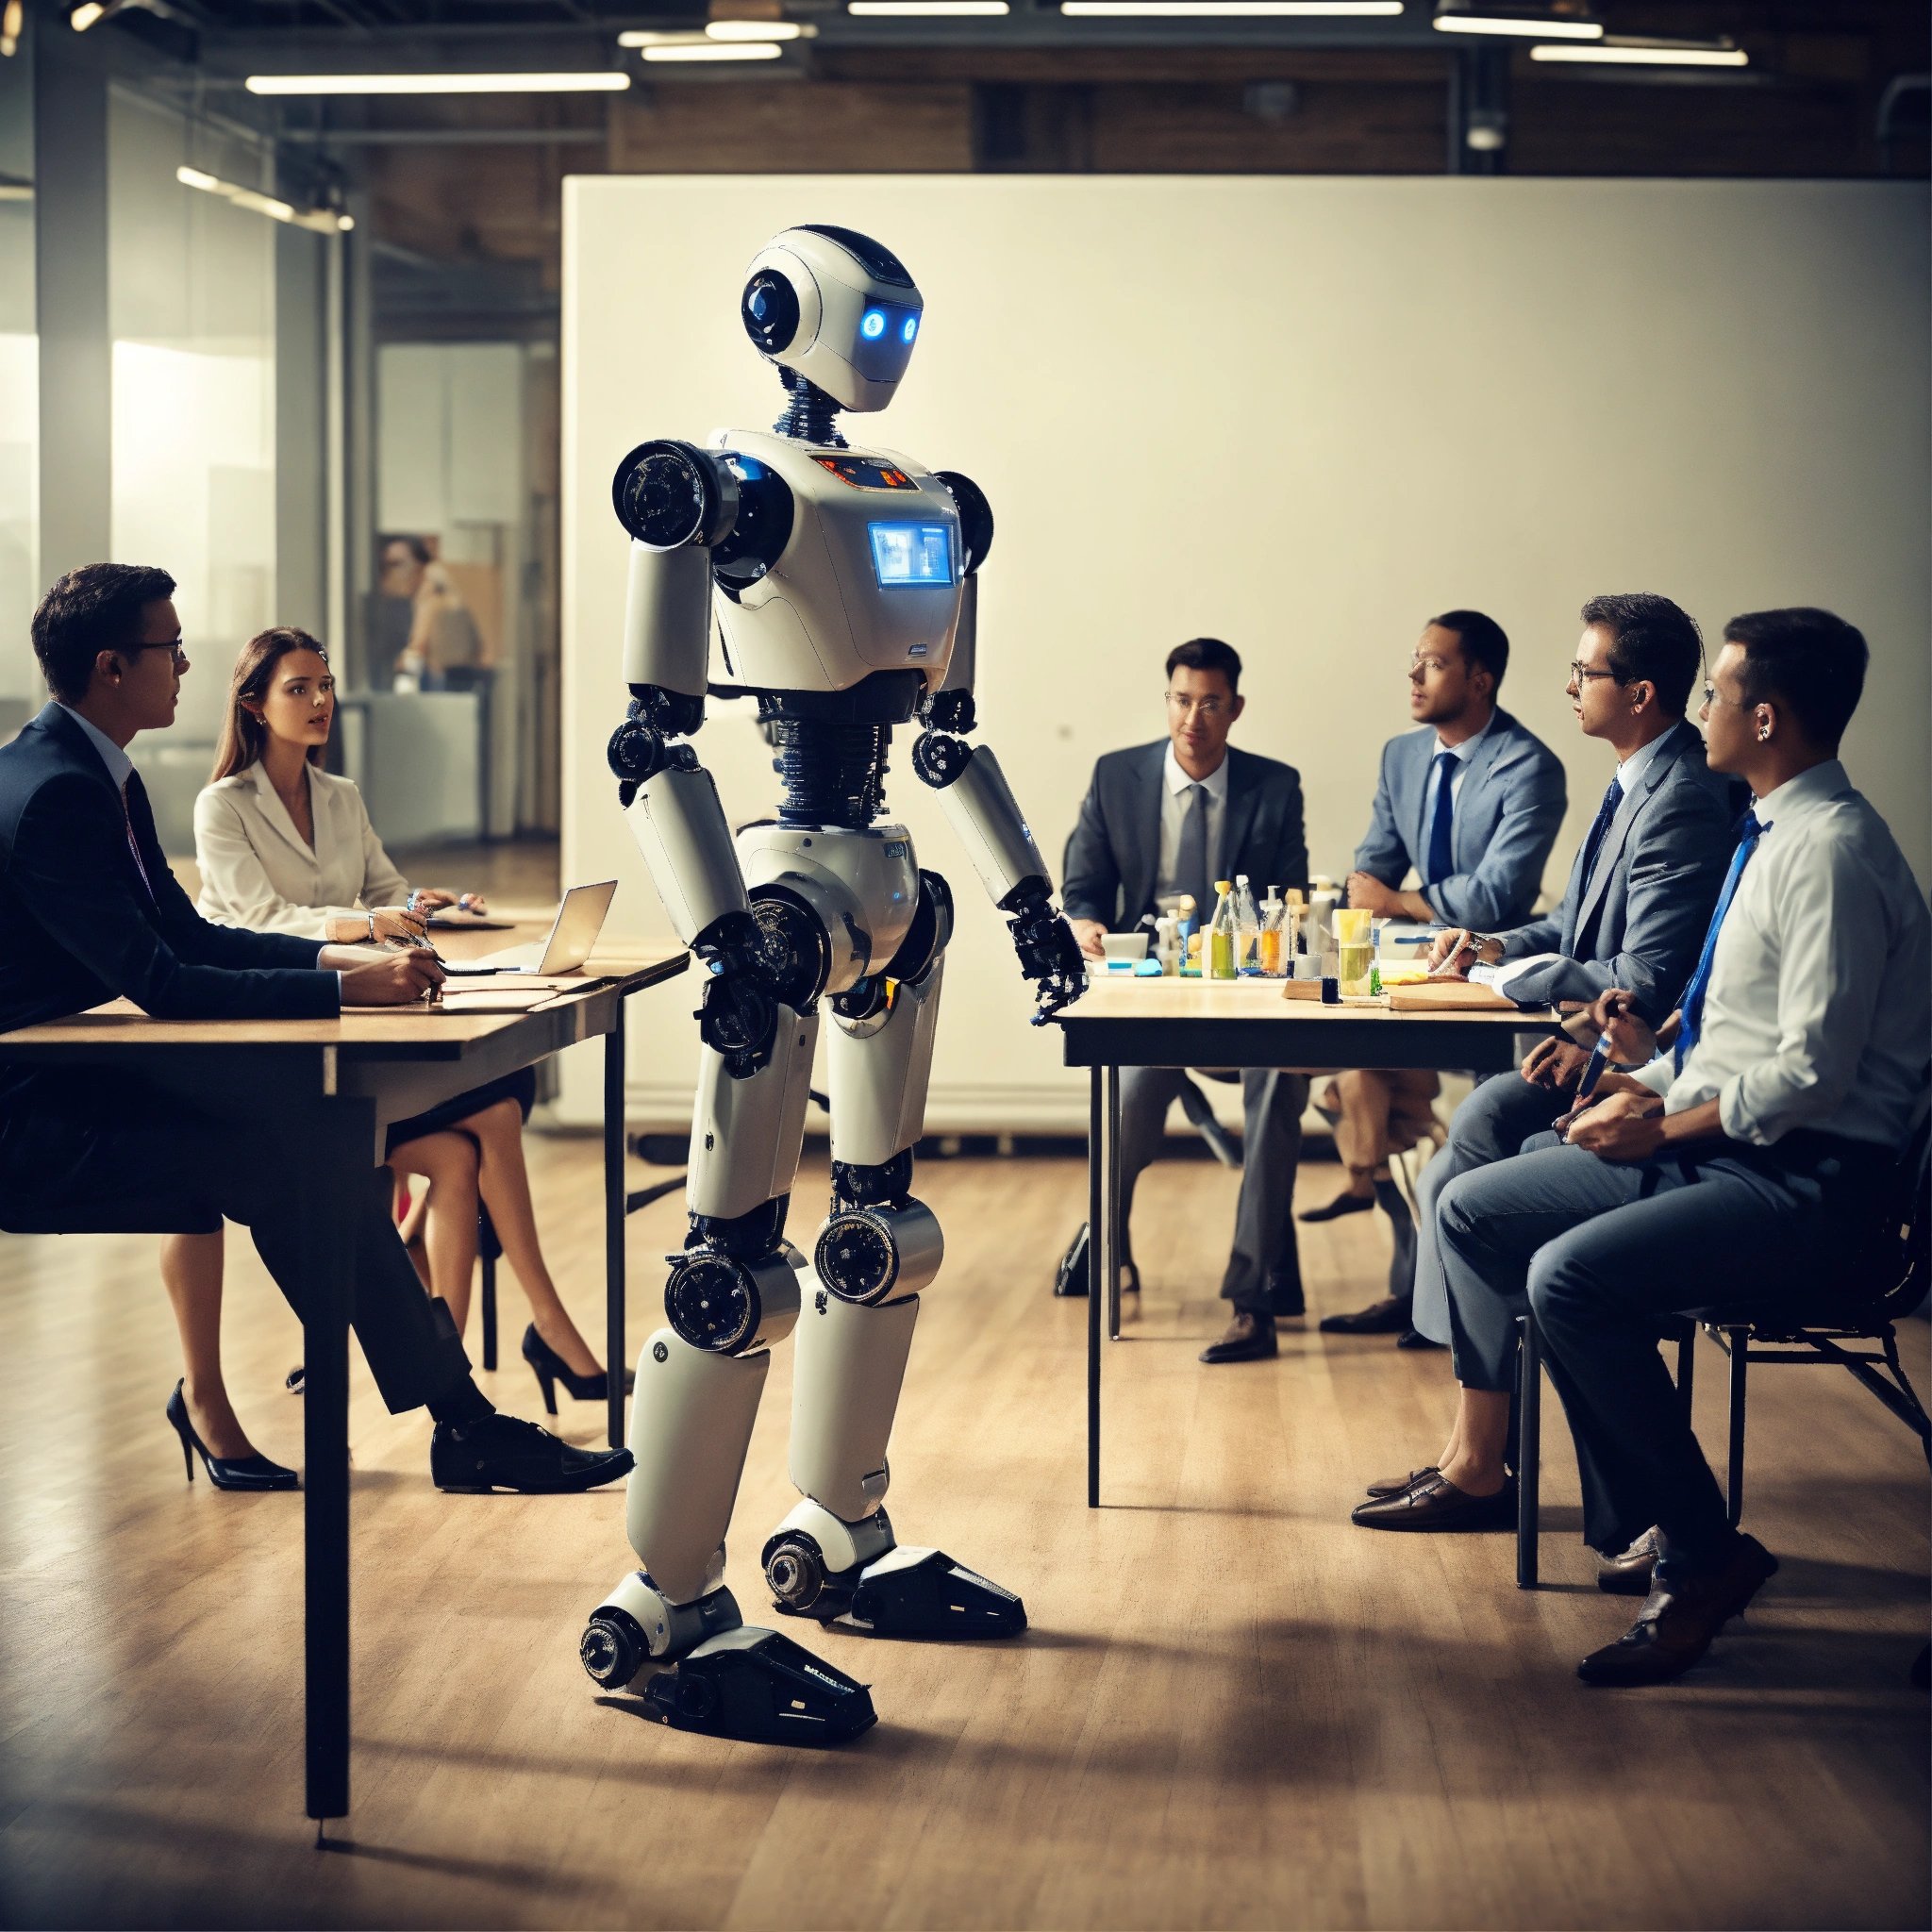 a group of people seated around a table in a modern, well-lit office environment. A humanoid robot with blue eyes and a screen on its chest stands in the middle, seemingly presenting or interacting with the attendees. The faces of the people are obscured for privacy. It’s difficult to determine the exact context of the meeting, but it appears to be a professional setting, possibly a business meeting or presentation.